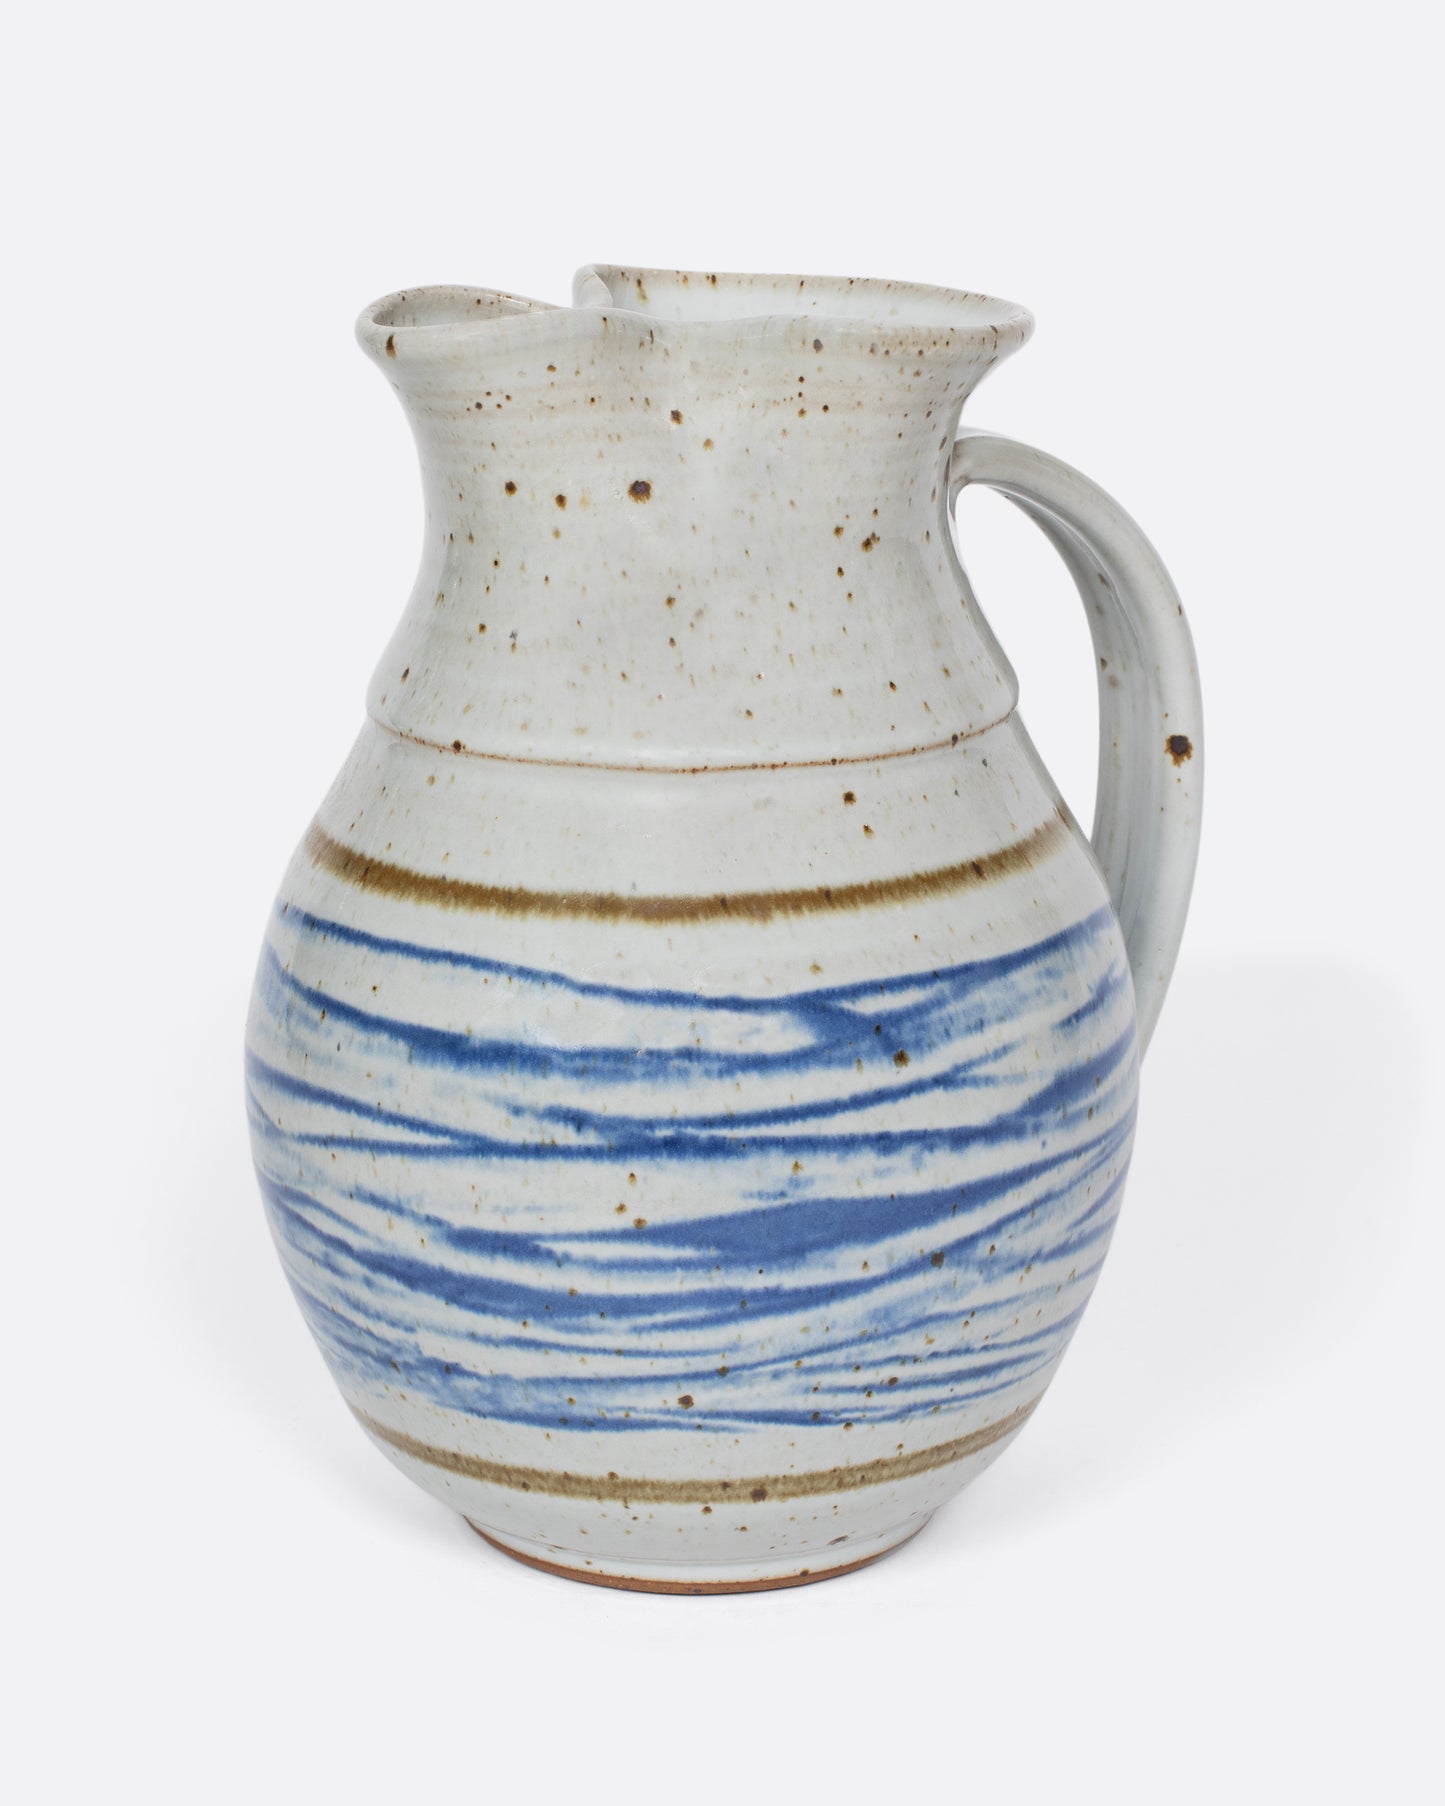 This vintage studio-made ceramic pitcher features a speckled white glaze and a blue water-like, hand-painted pattern.